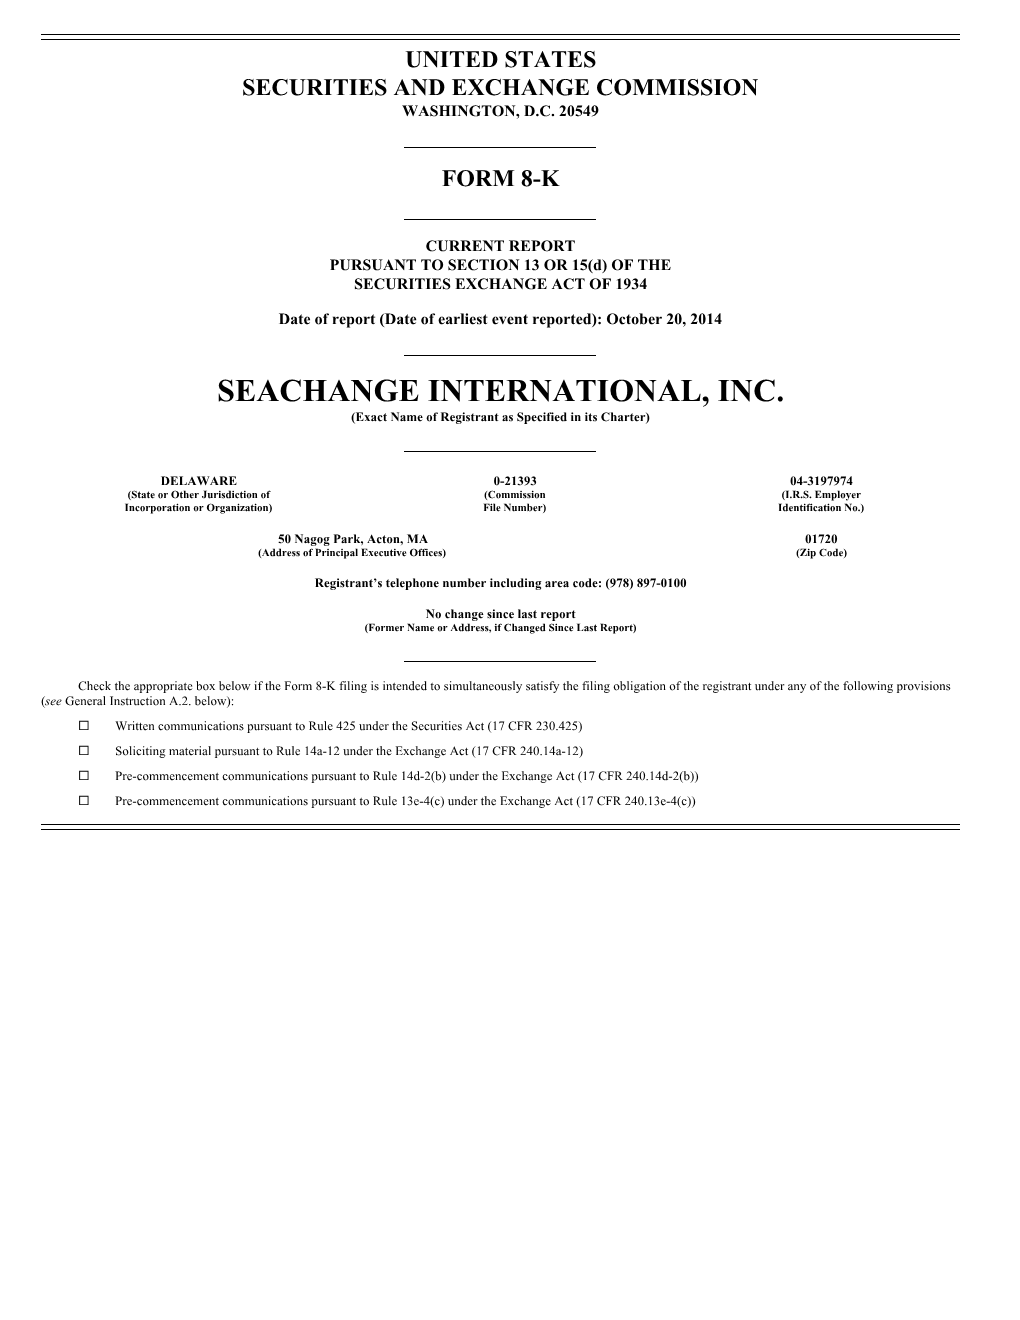 SEACHANGE INTERNATIONAL, INC. (Exact Name of Registrant As Specified in Its Charter)